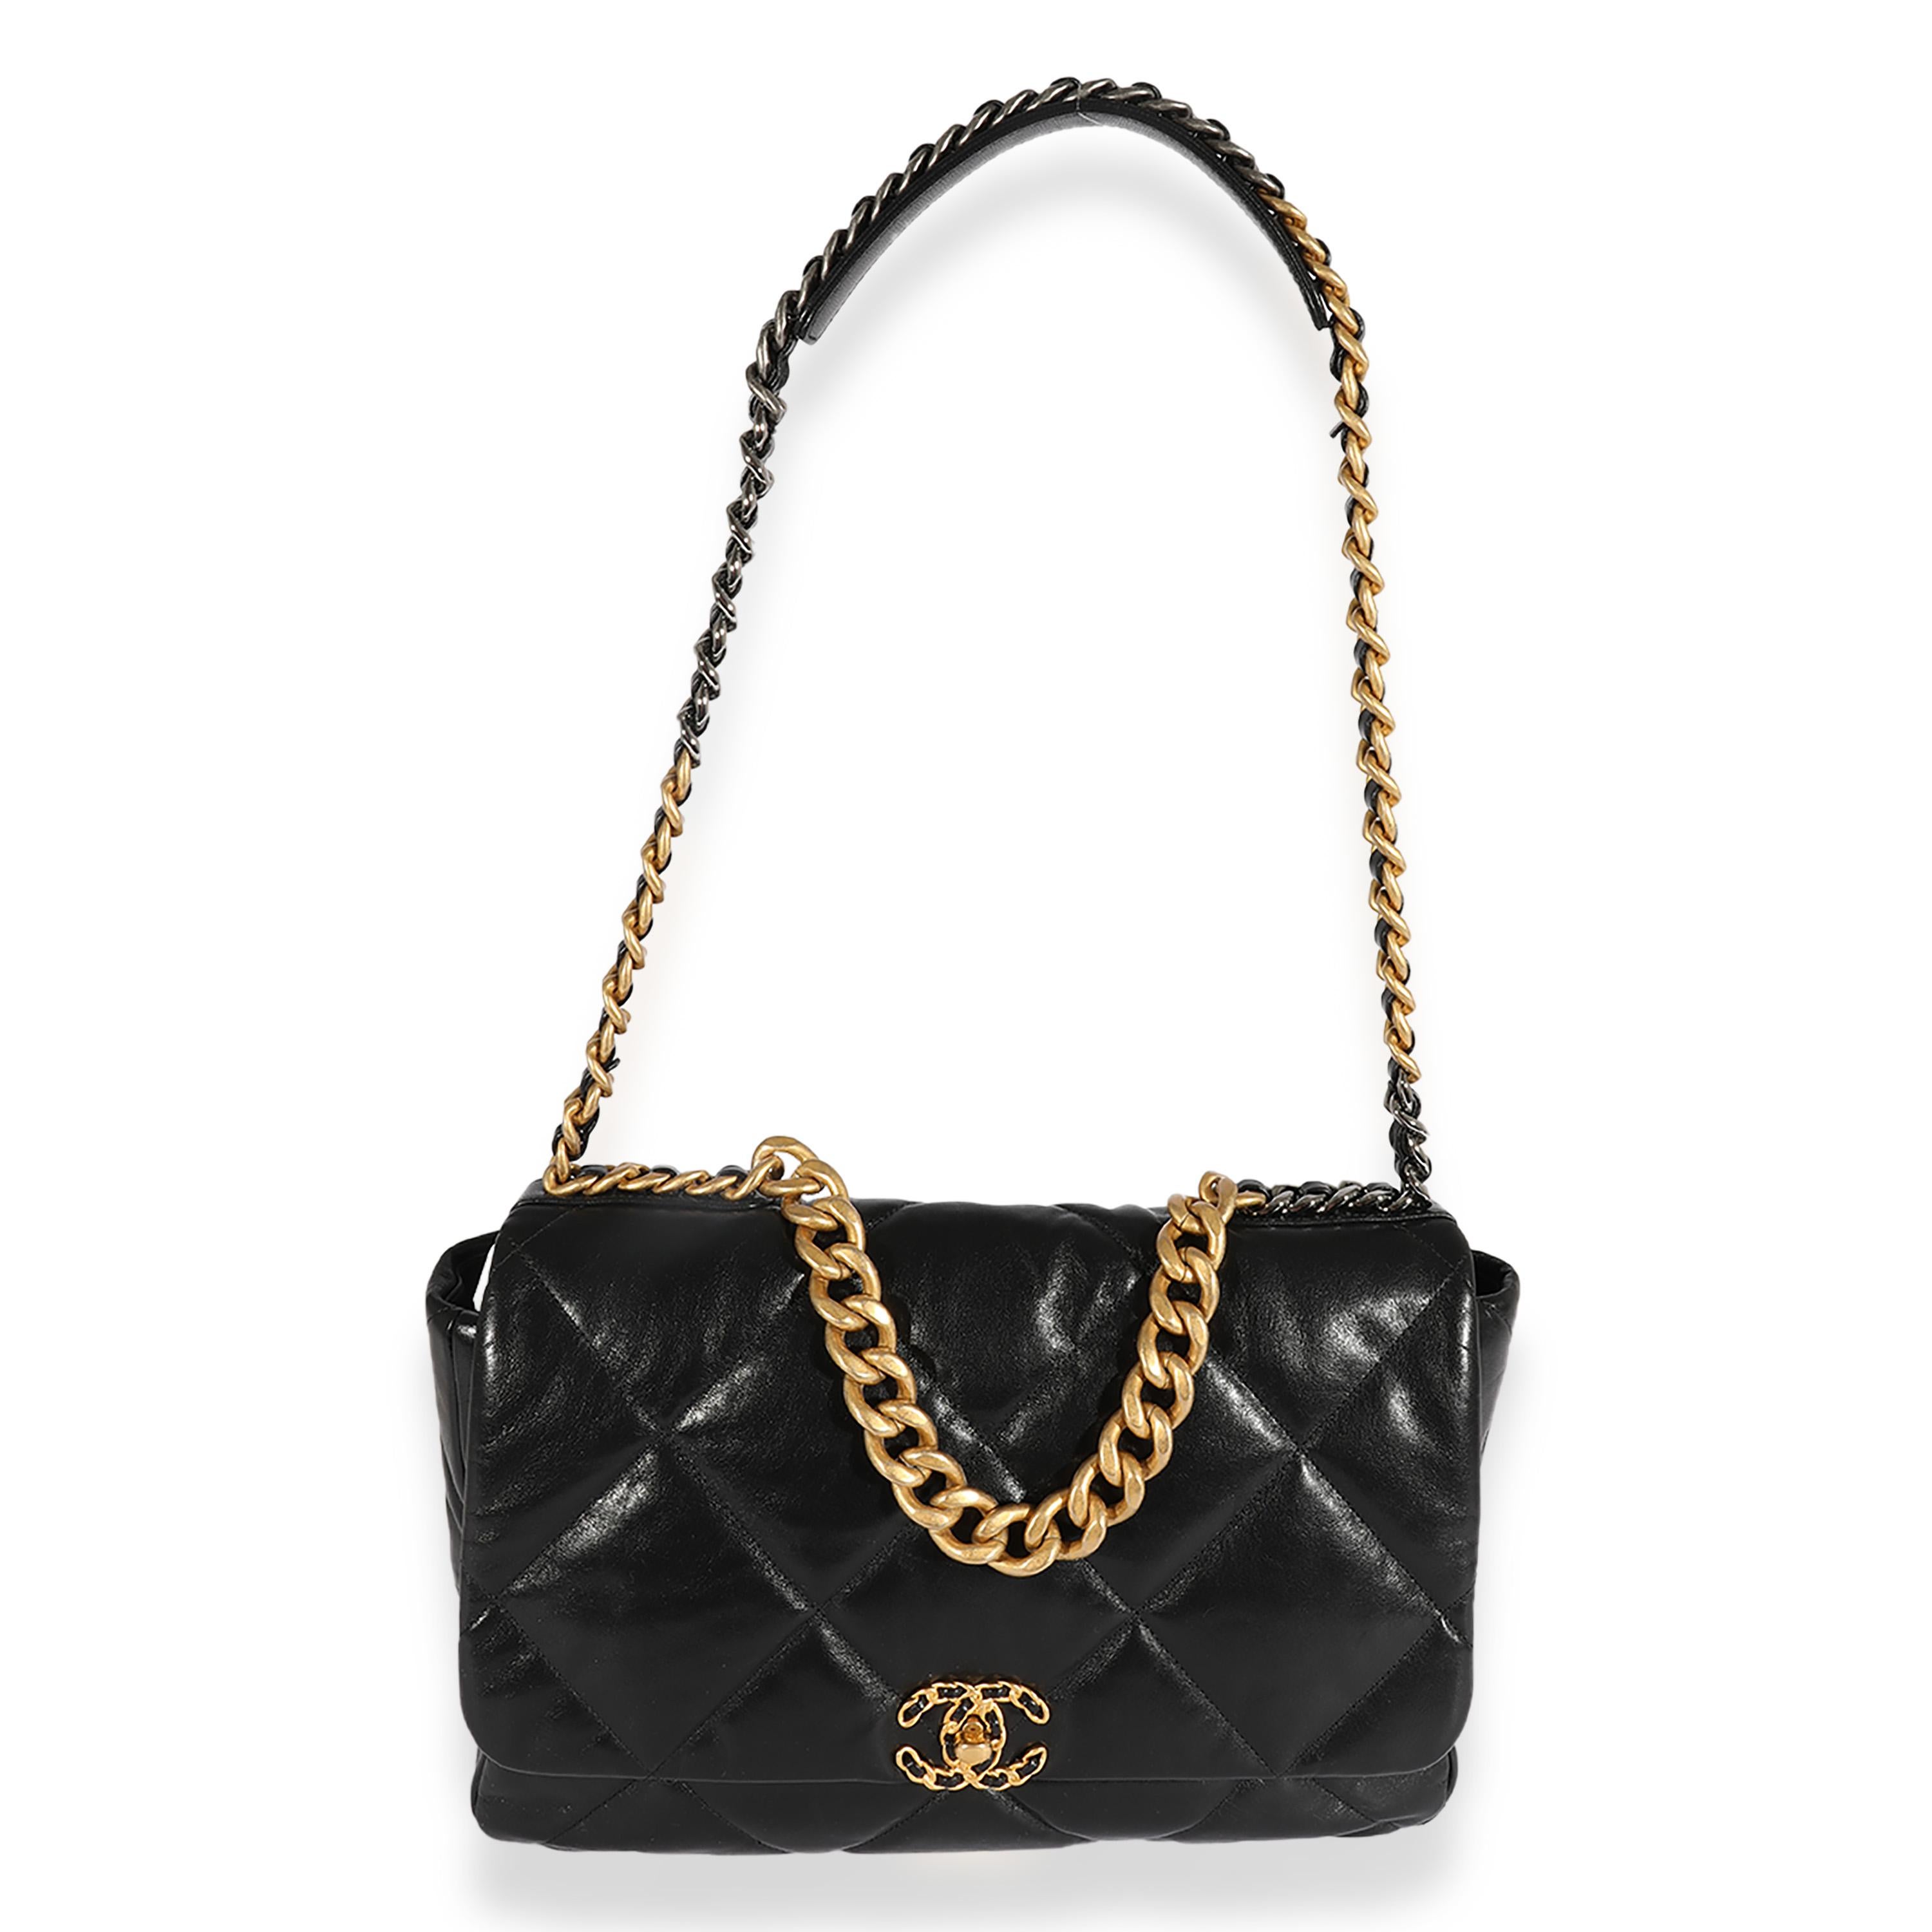 Listing Title: Chanel Black Quilted Lambskin 19 Maxi Flap Bag
SKU: 124930
MSRP: 6900.00
Condition: Pre-owned 
Handbag Condition: Excellent
Condition Comments: Excellent Condition. Plastic on some hardware. Light scuffing to underflap. No other